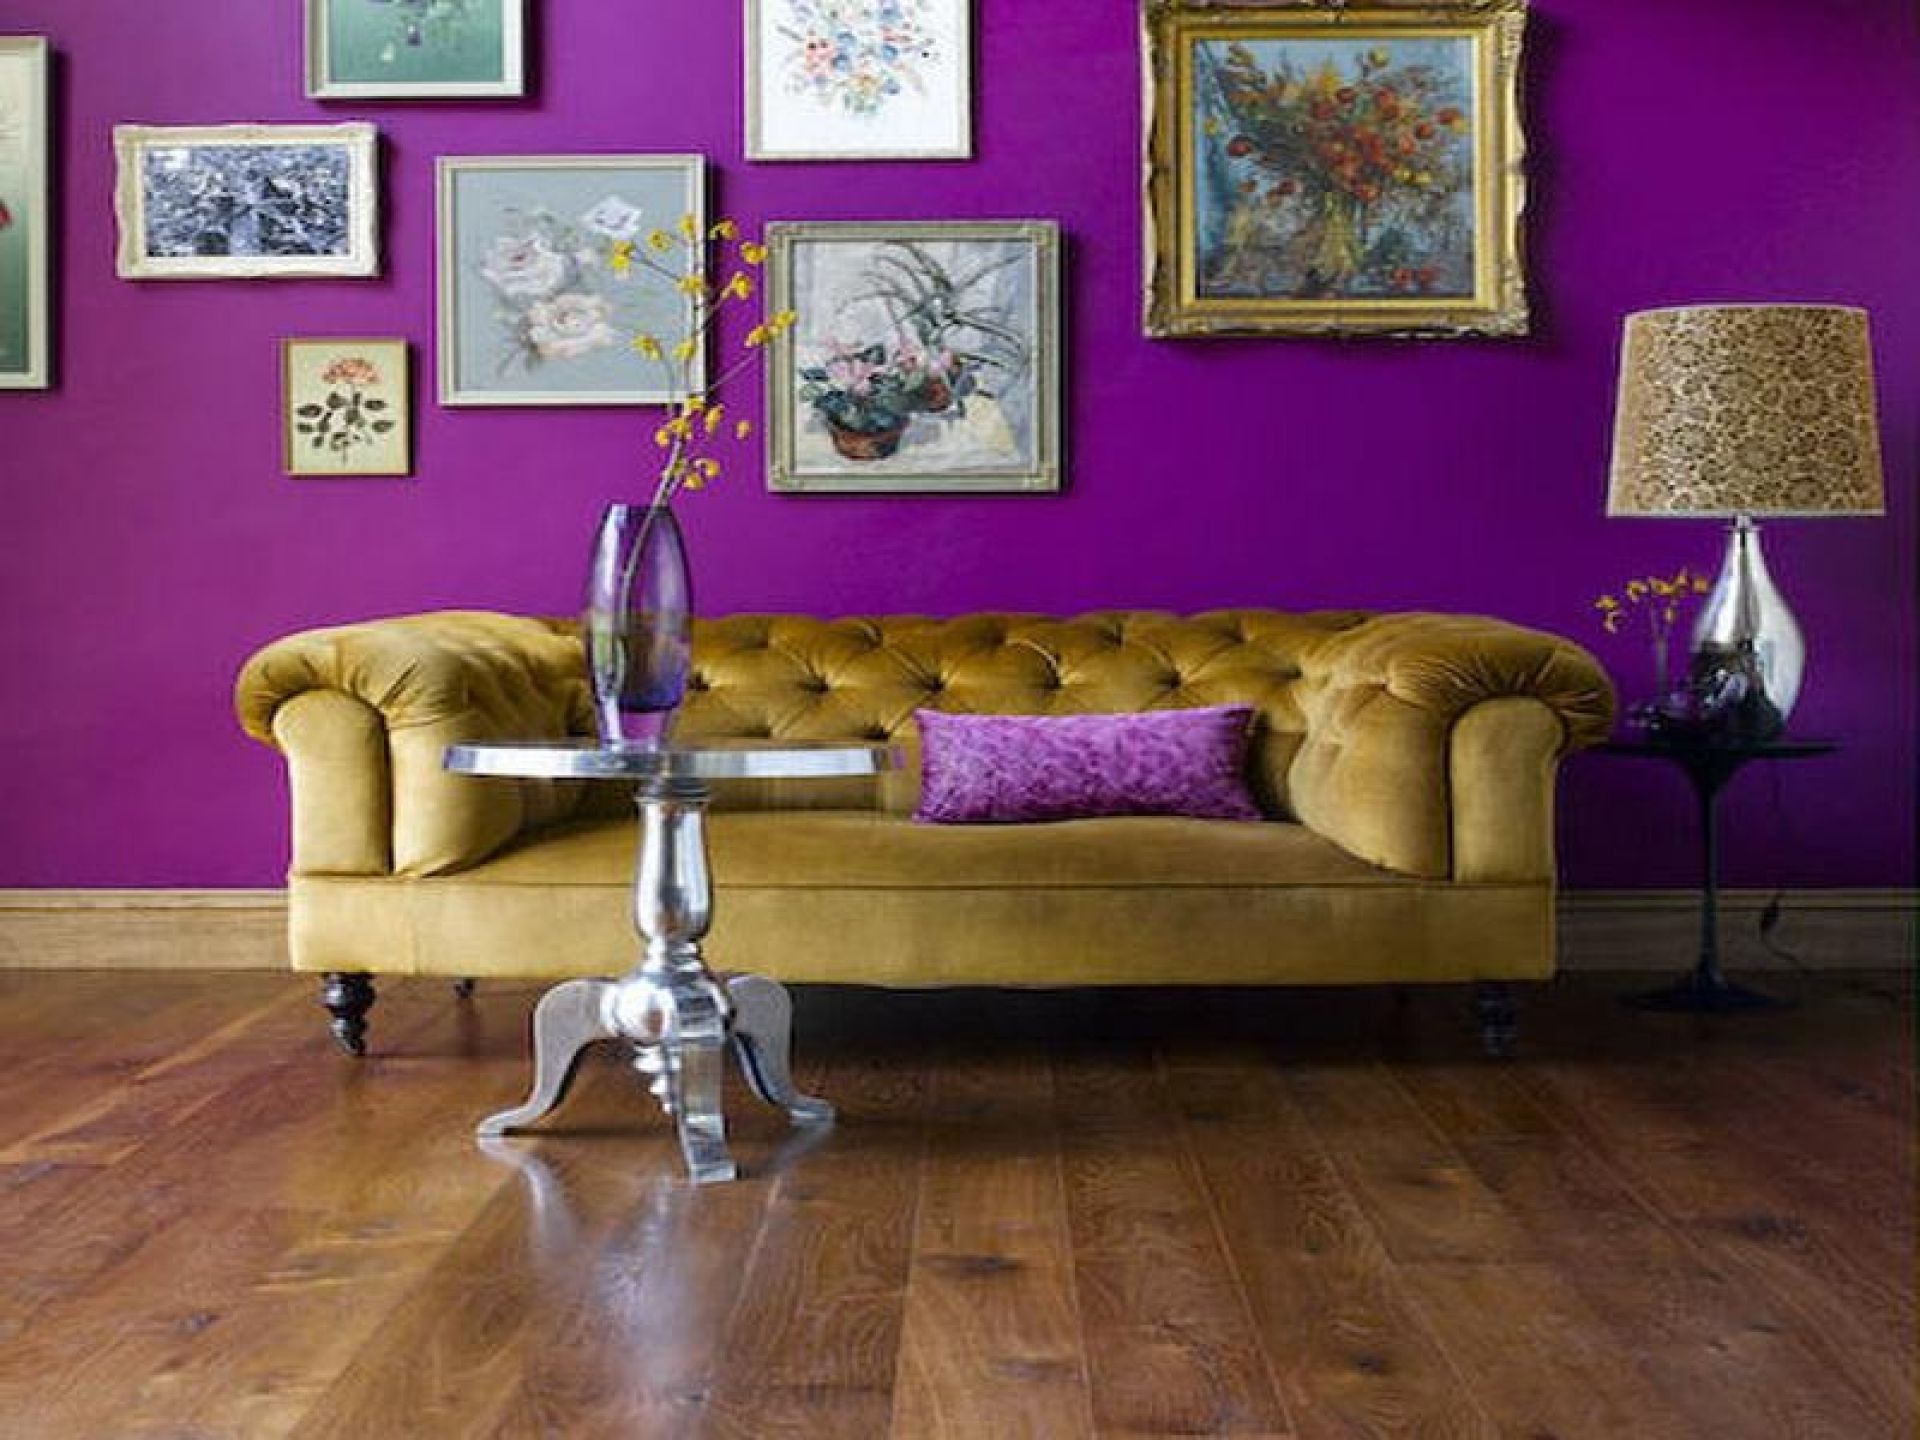 Channel 4 Colourful Living Room Design Ideas